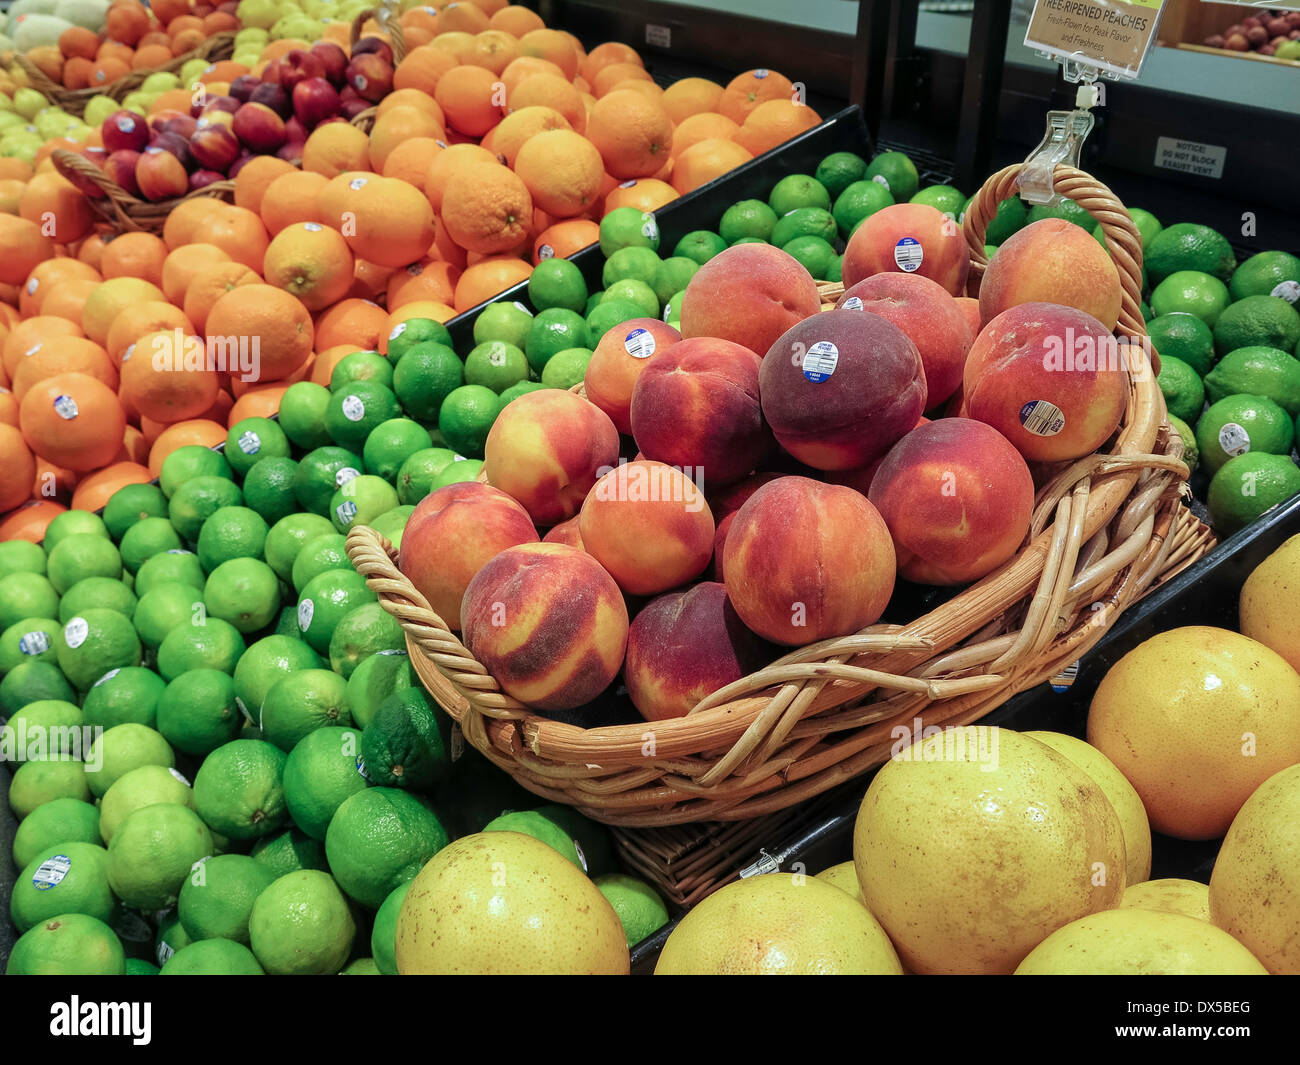 Peaches and Citrus Display, Fresh Produce Section, Publix Super Market in Flagler Beach, Florida Stock Photo